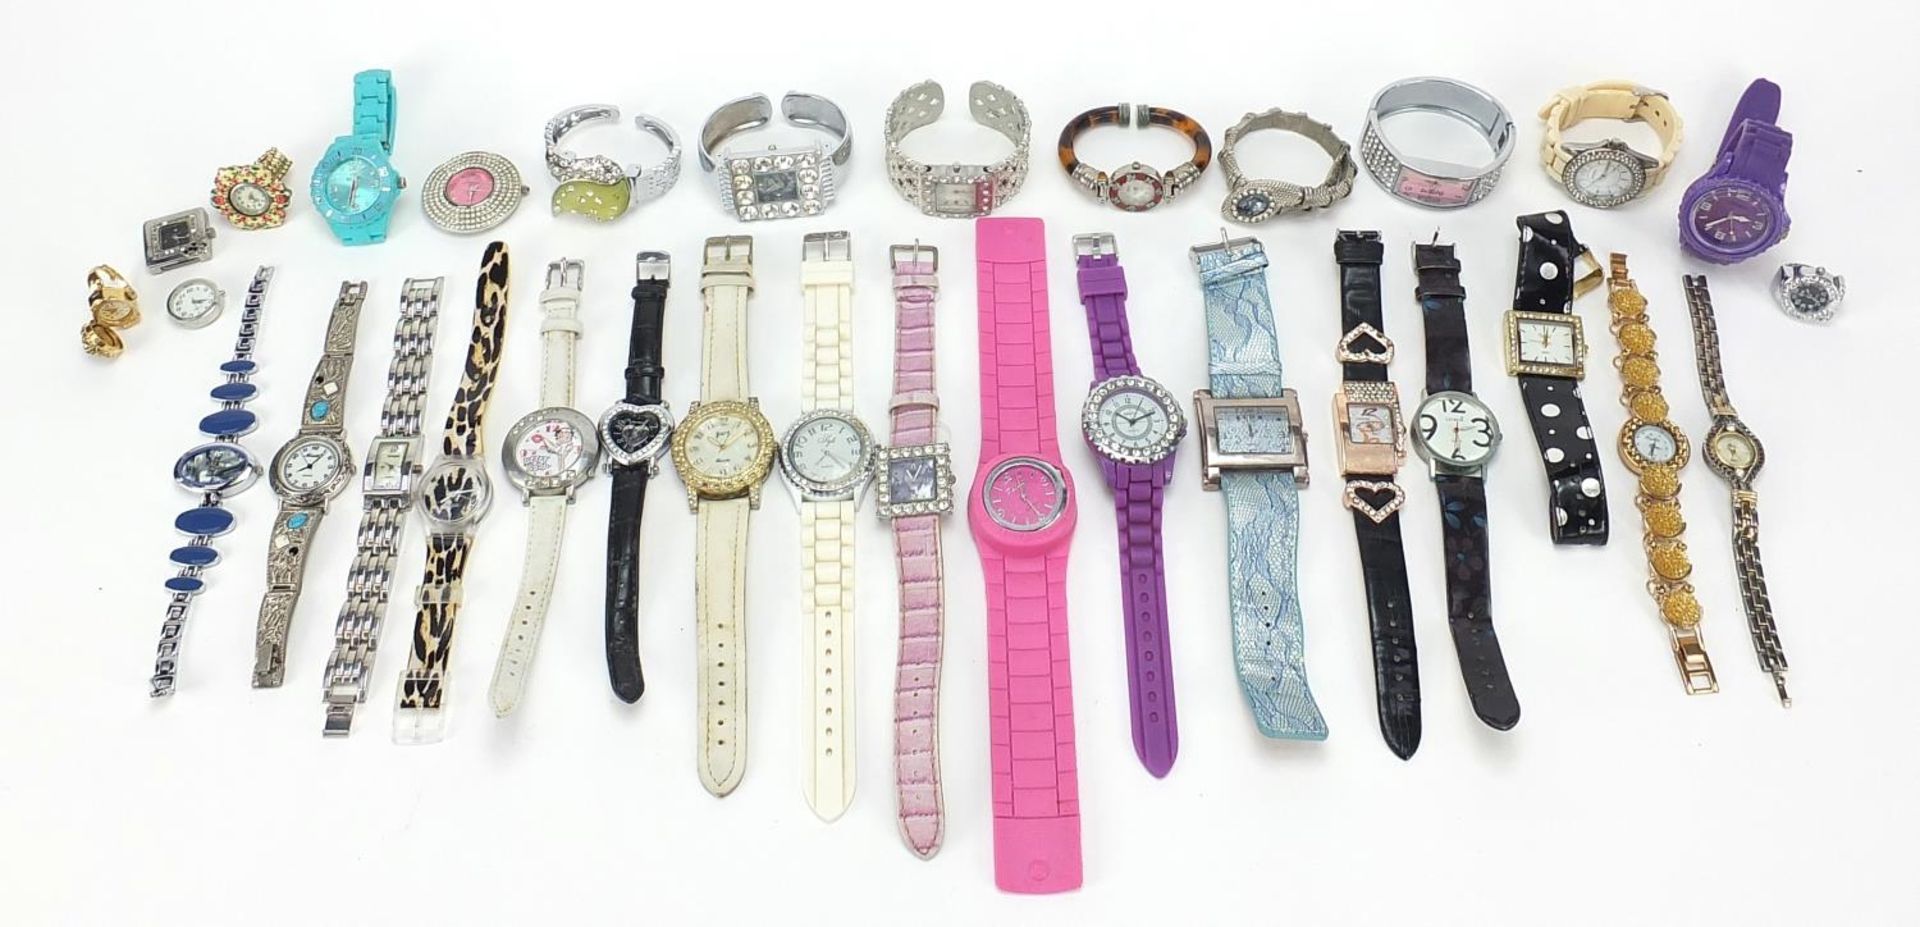 Collection of ladies dress wristwatches and ring watches including Betty Boop